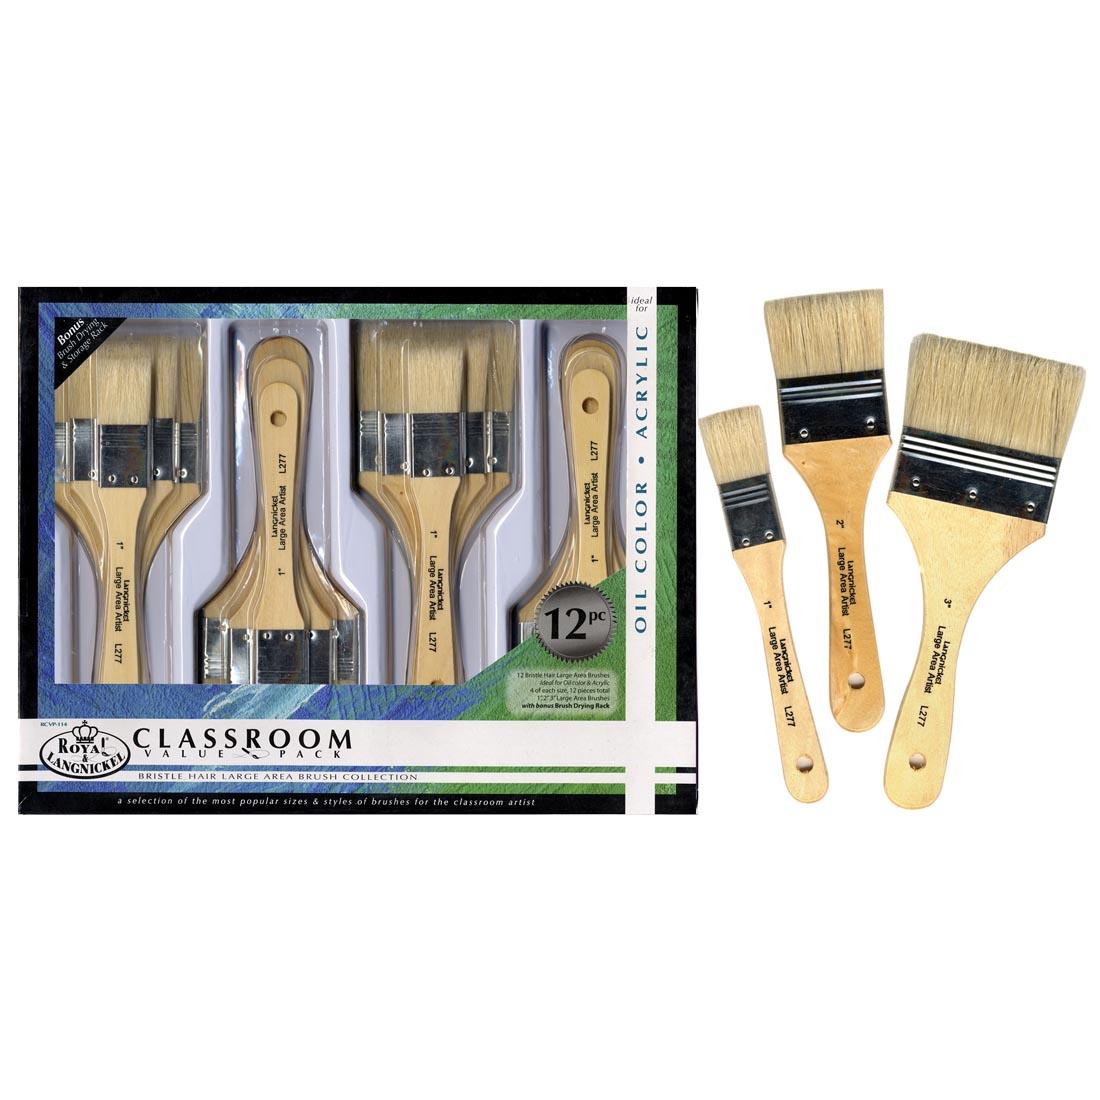 Royal & Langnickel Classroom Value Pack Bristle Hair Large Area Brush Collection shown in the package with examples of the 3 different brush sizes beside it